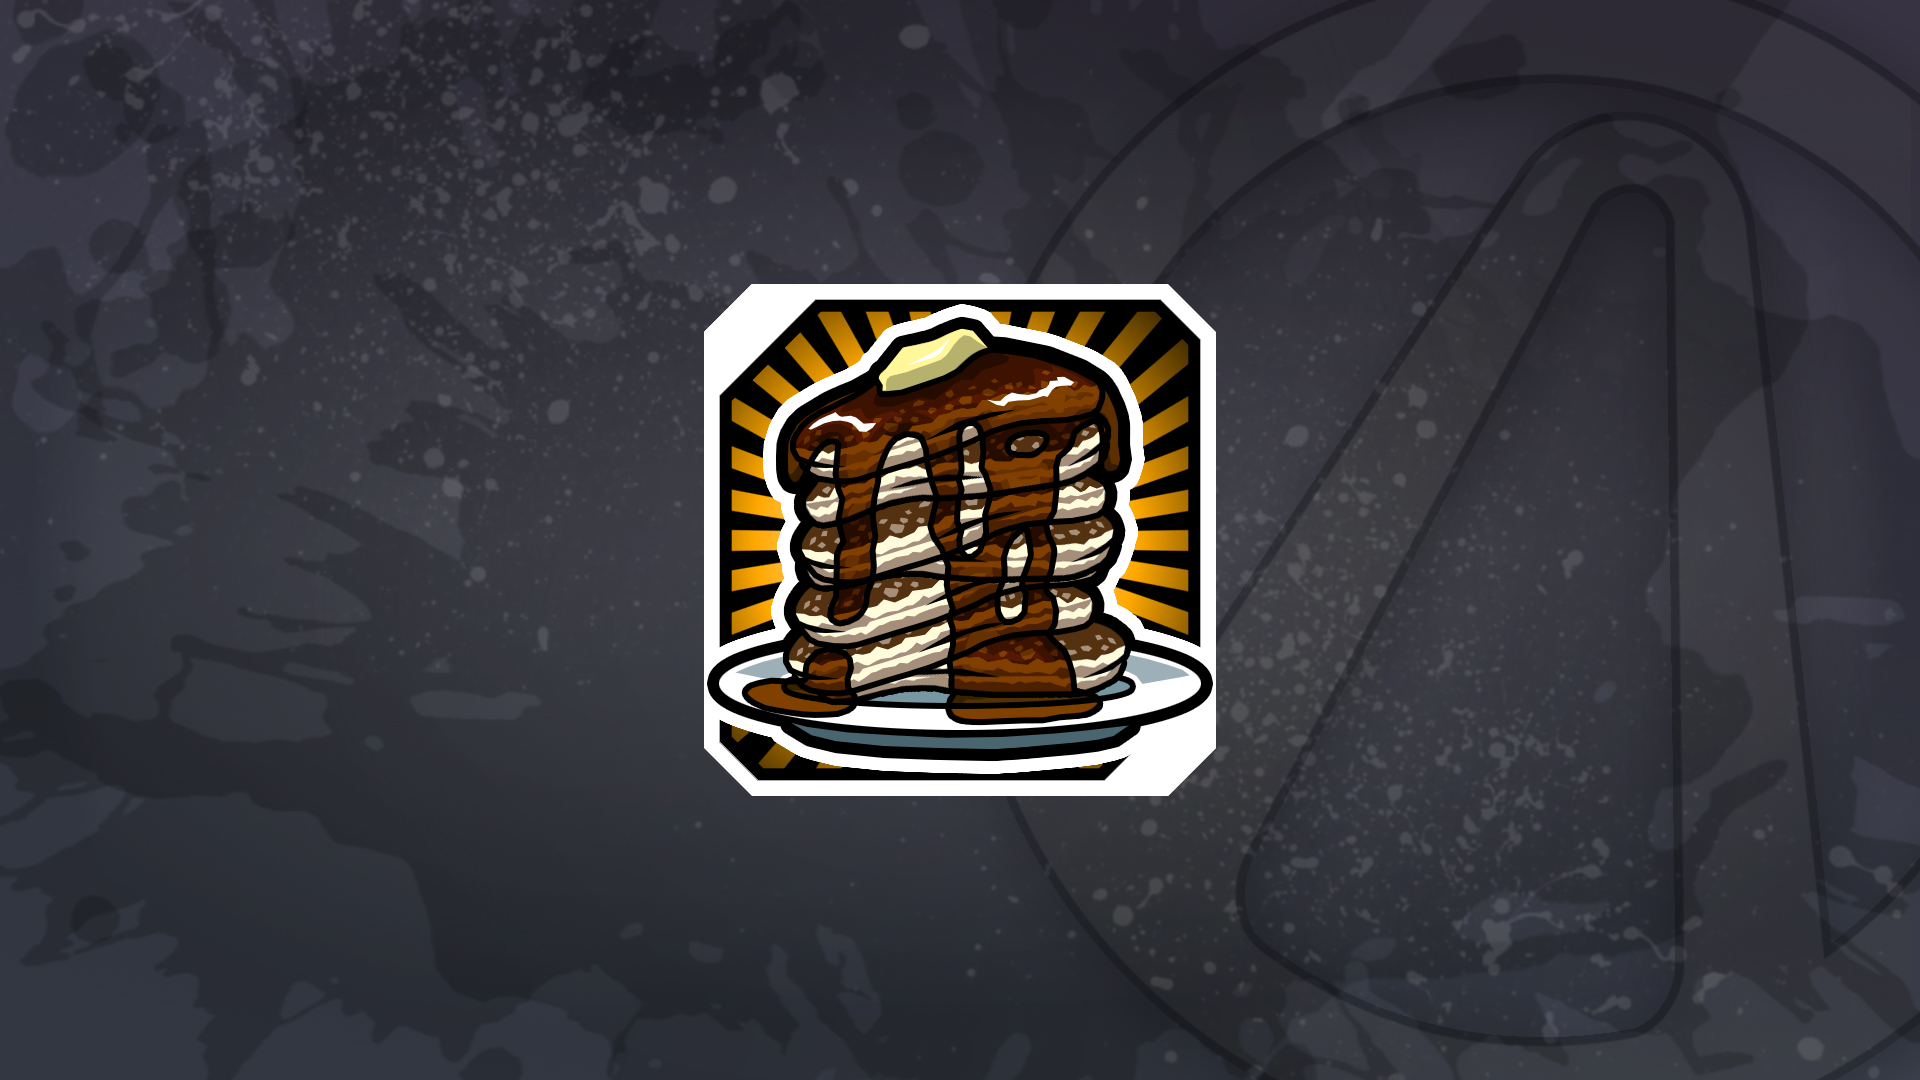 Icon for Pancake Parlor